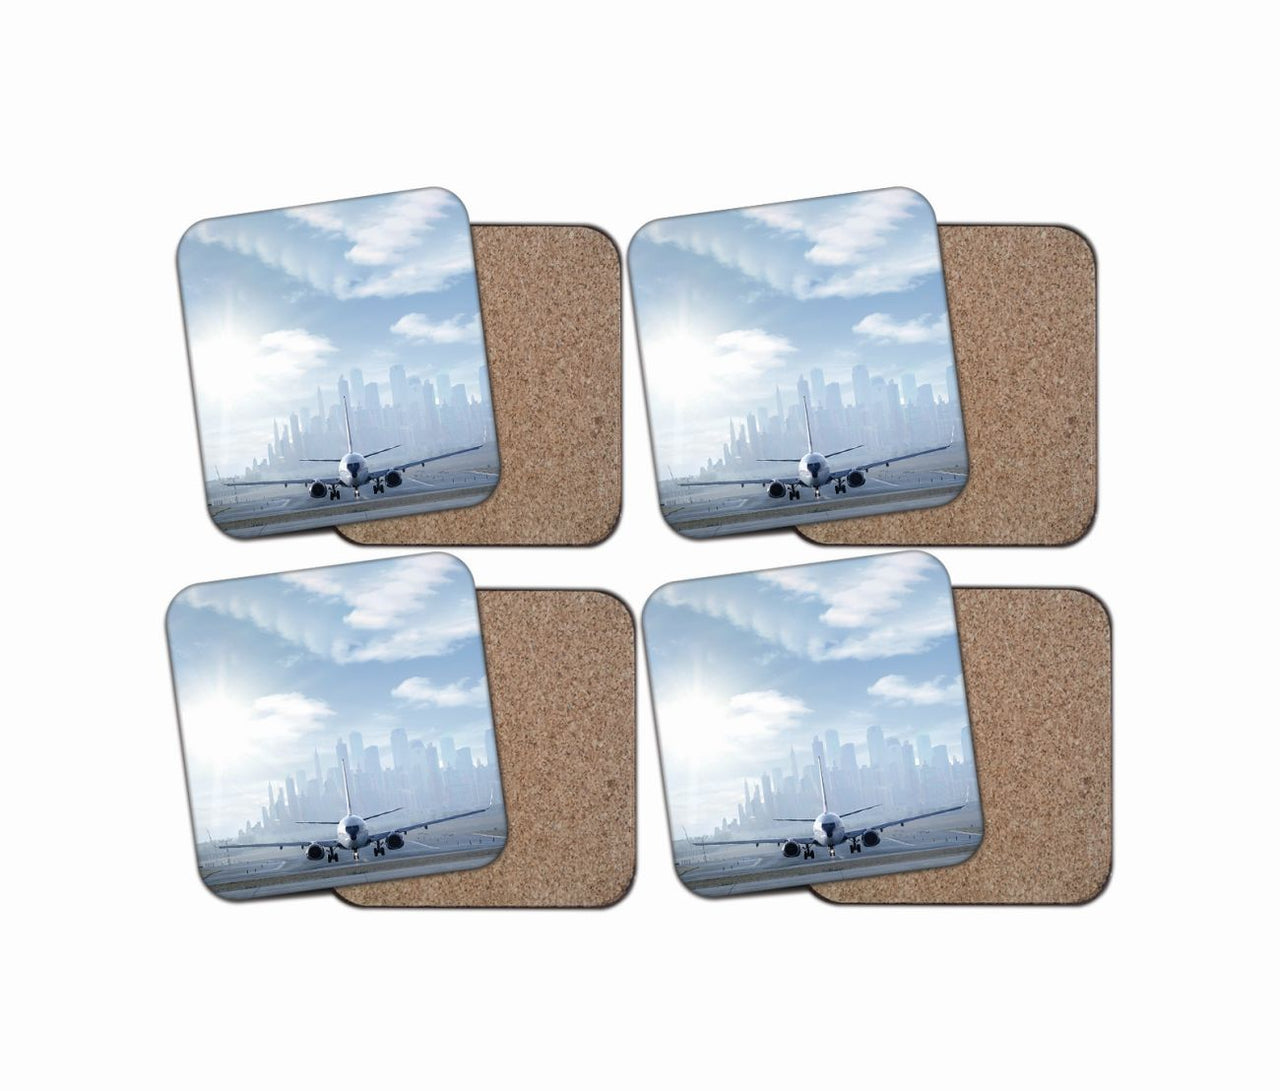 Boeing 737 & City View Behind Designed Coasters